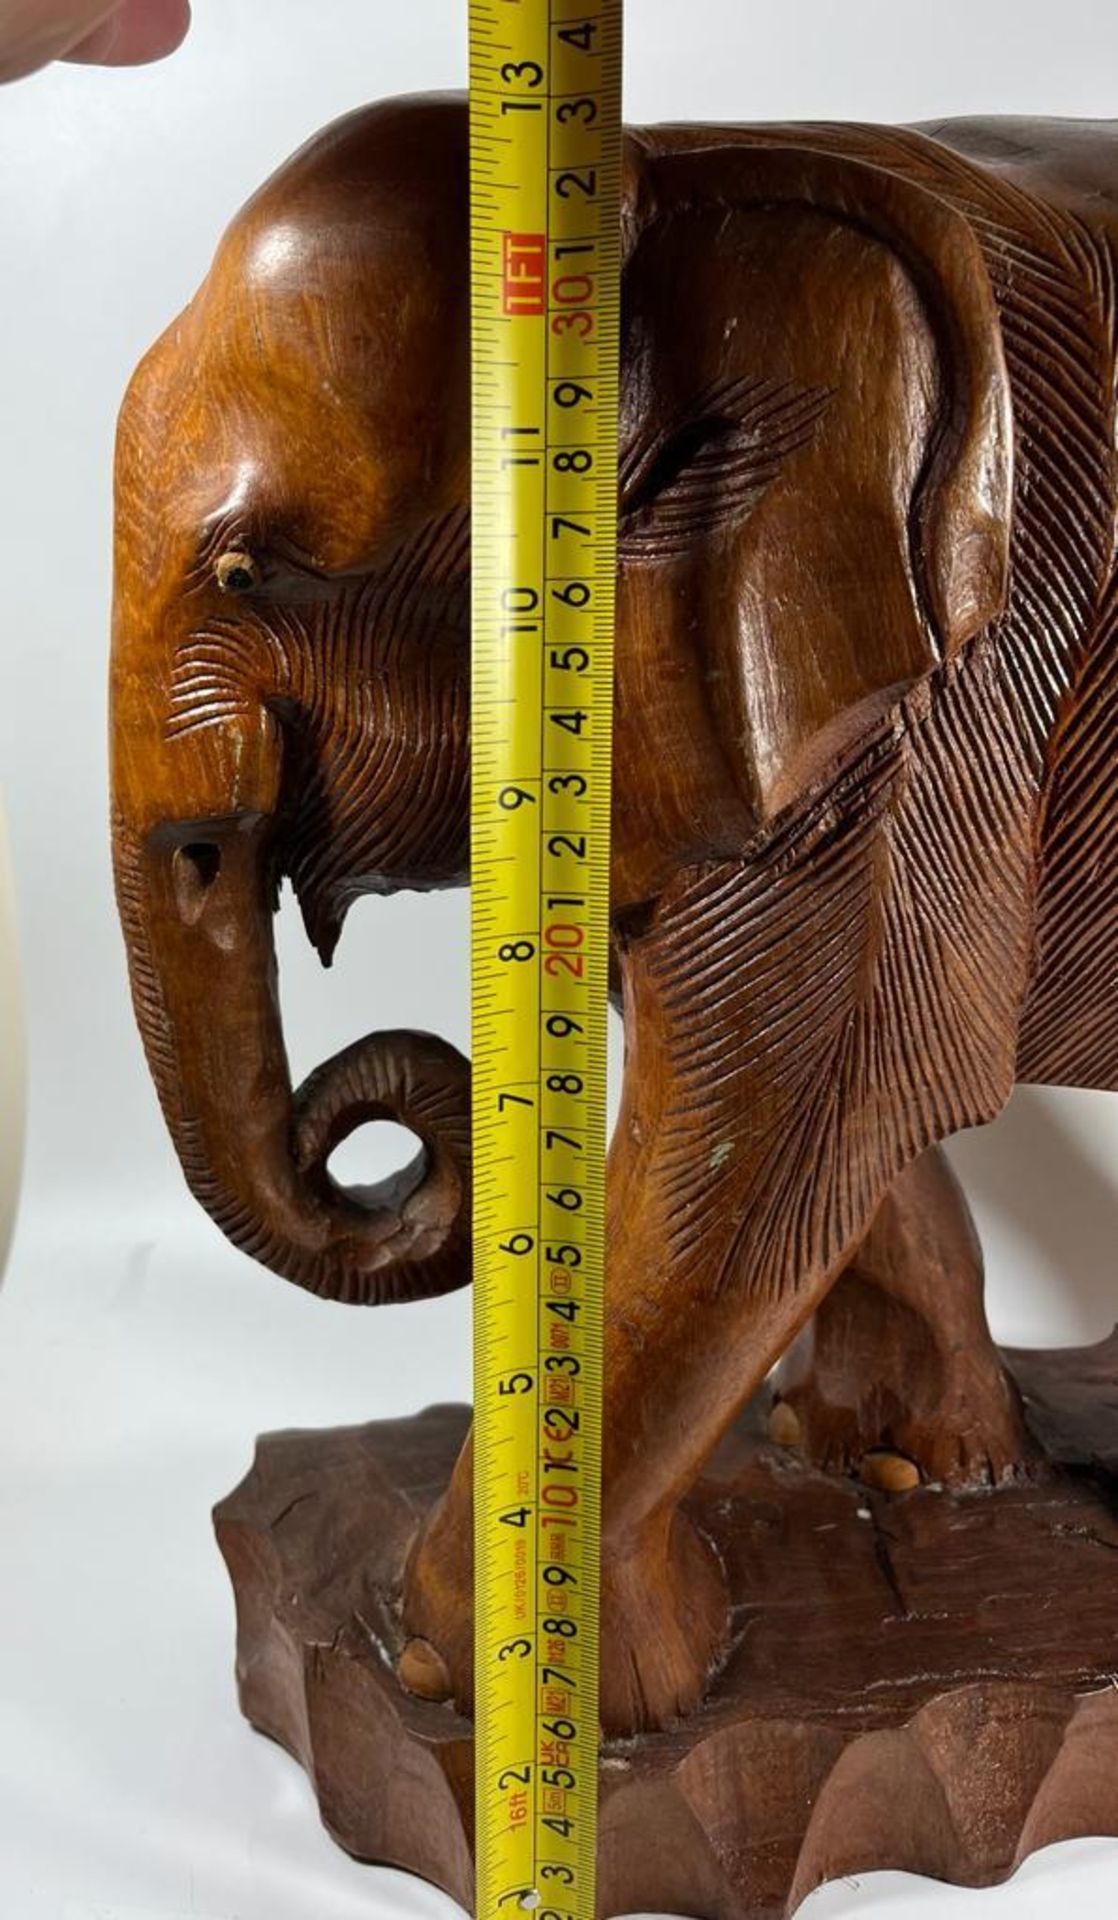 A LARGE AND HEAVY VINTAGE CARVED SOLID TEAK ELEPHANT MODEL, LIKELY CARVED FROM ONE PIECE OF TEAK - Image 10 of 10